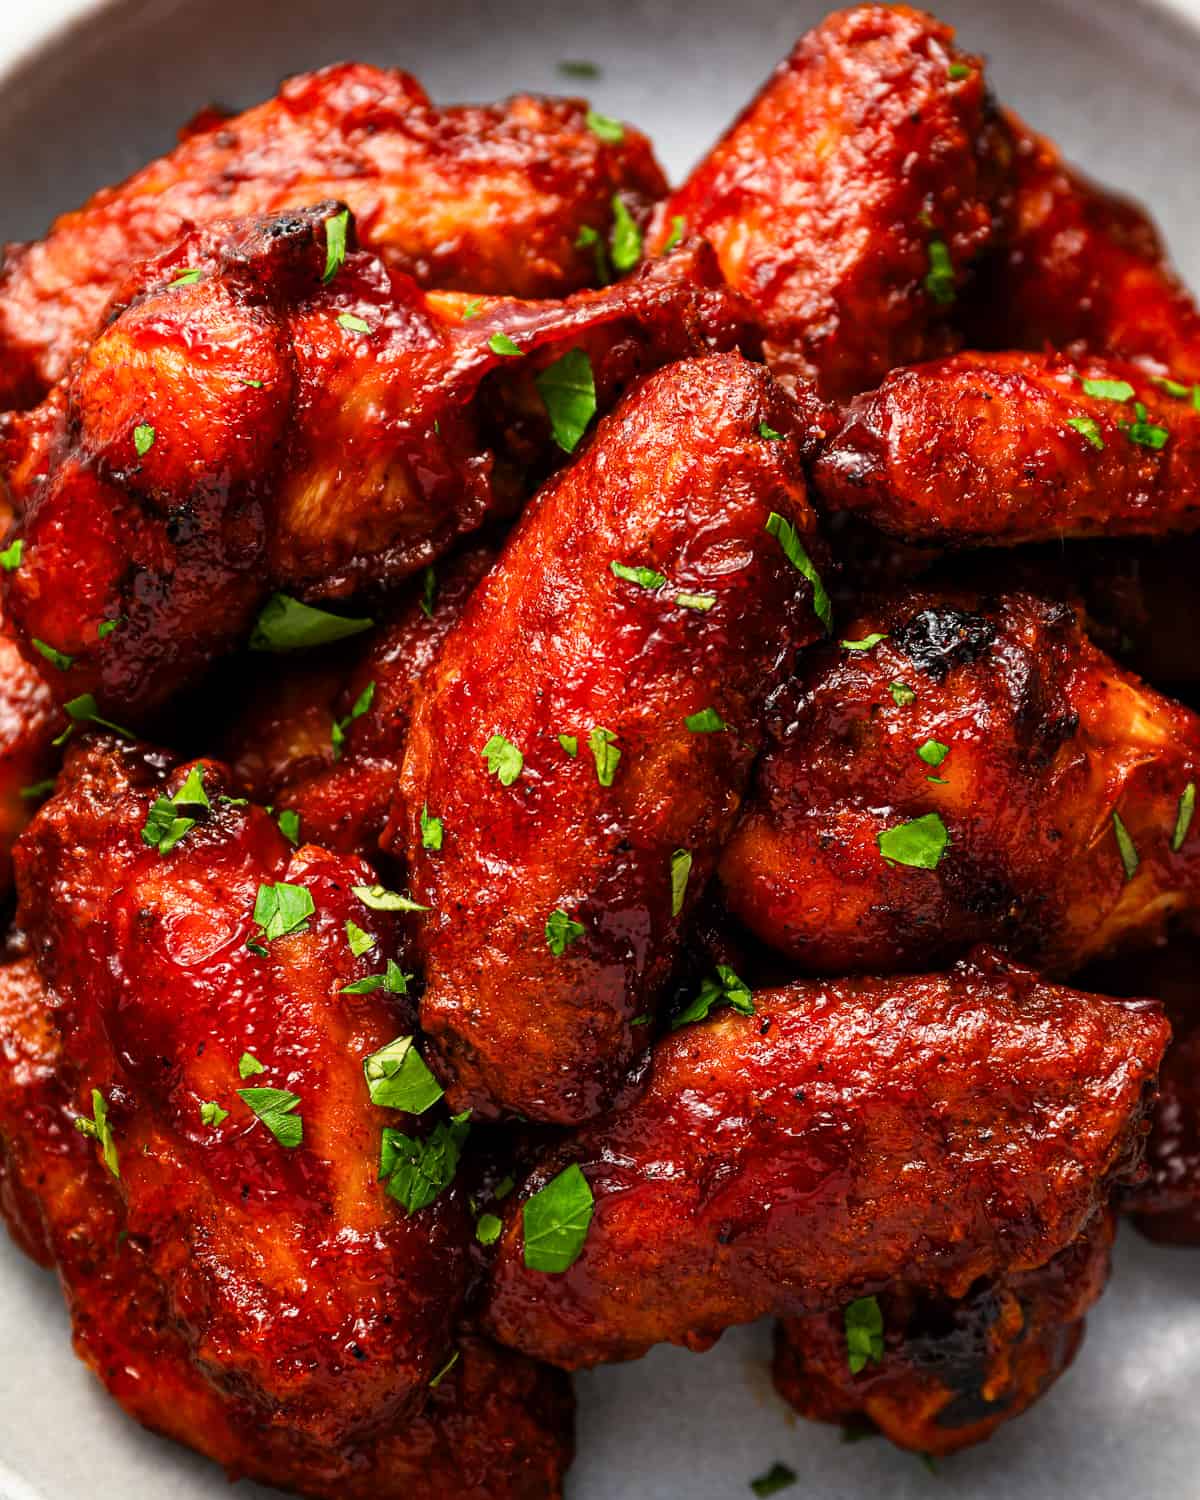 Delicious bbq chicken wings on a plate.